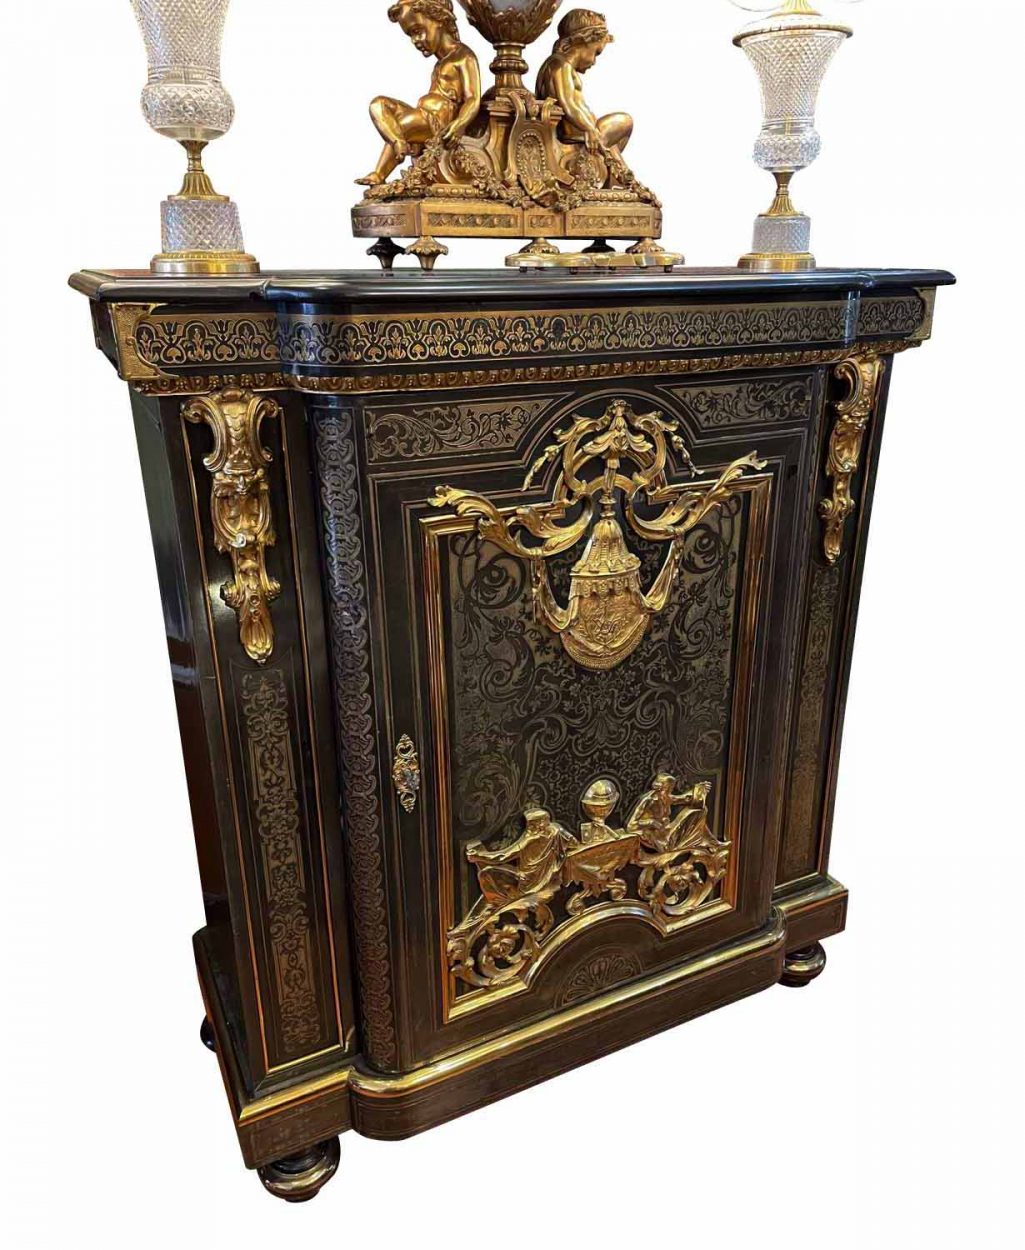 19th century French Boulle style gilt bronze mounted and marble top Cabinet - high quality gilt bronze mounts